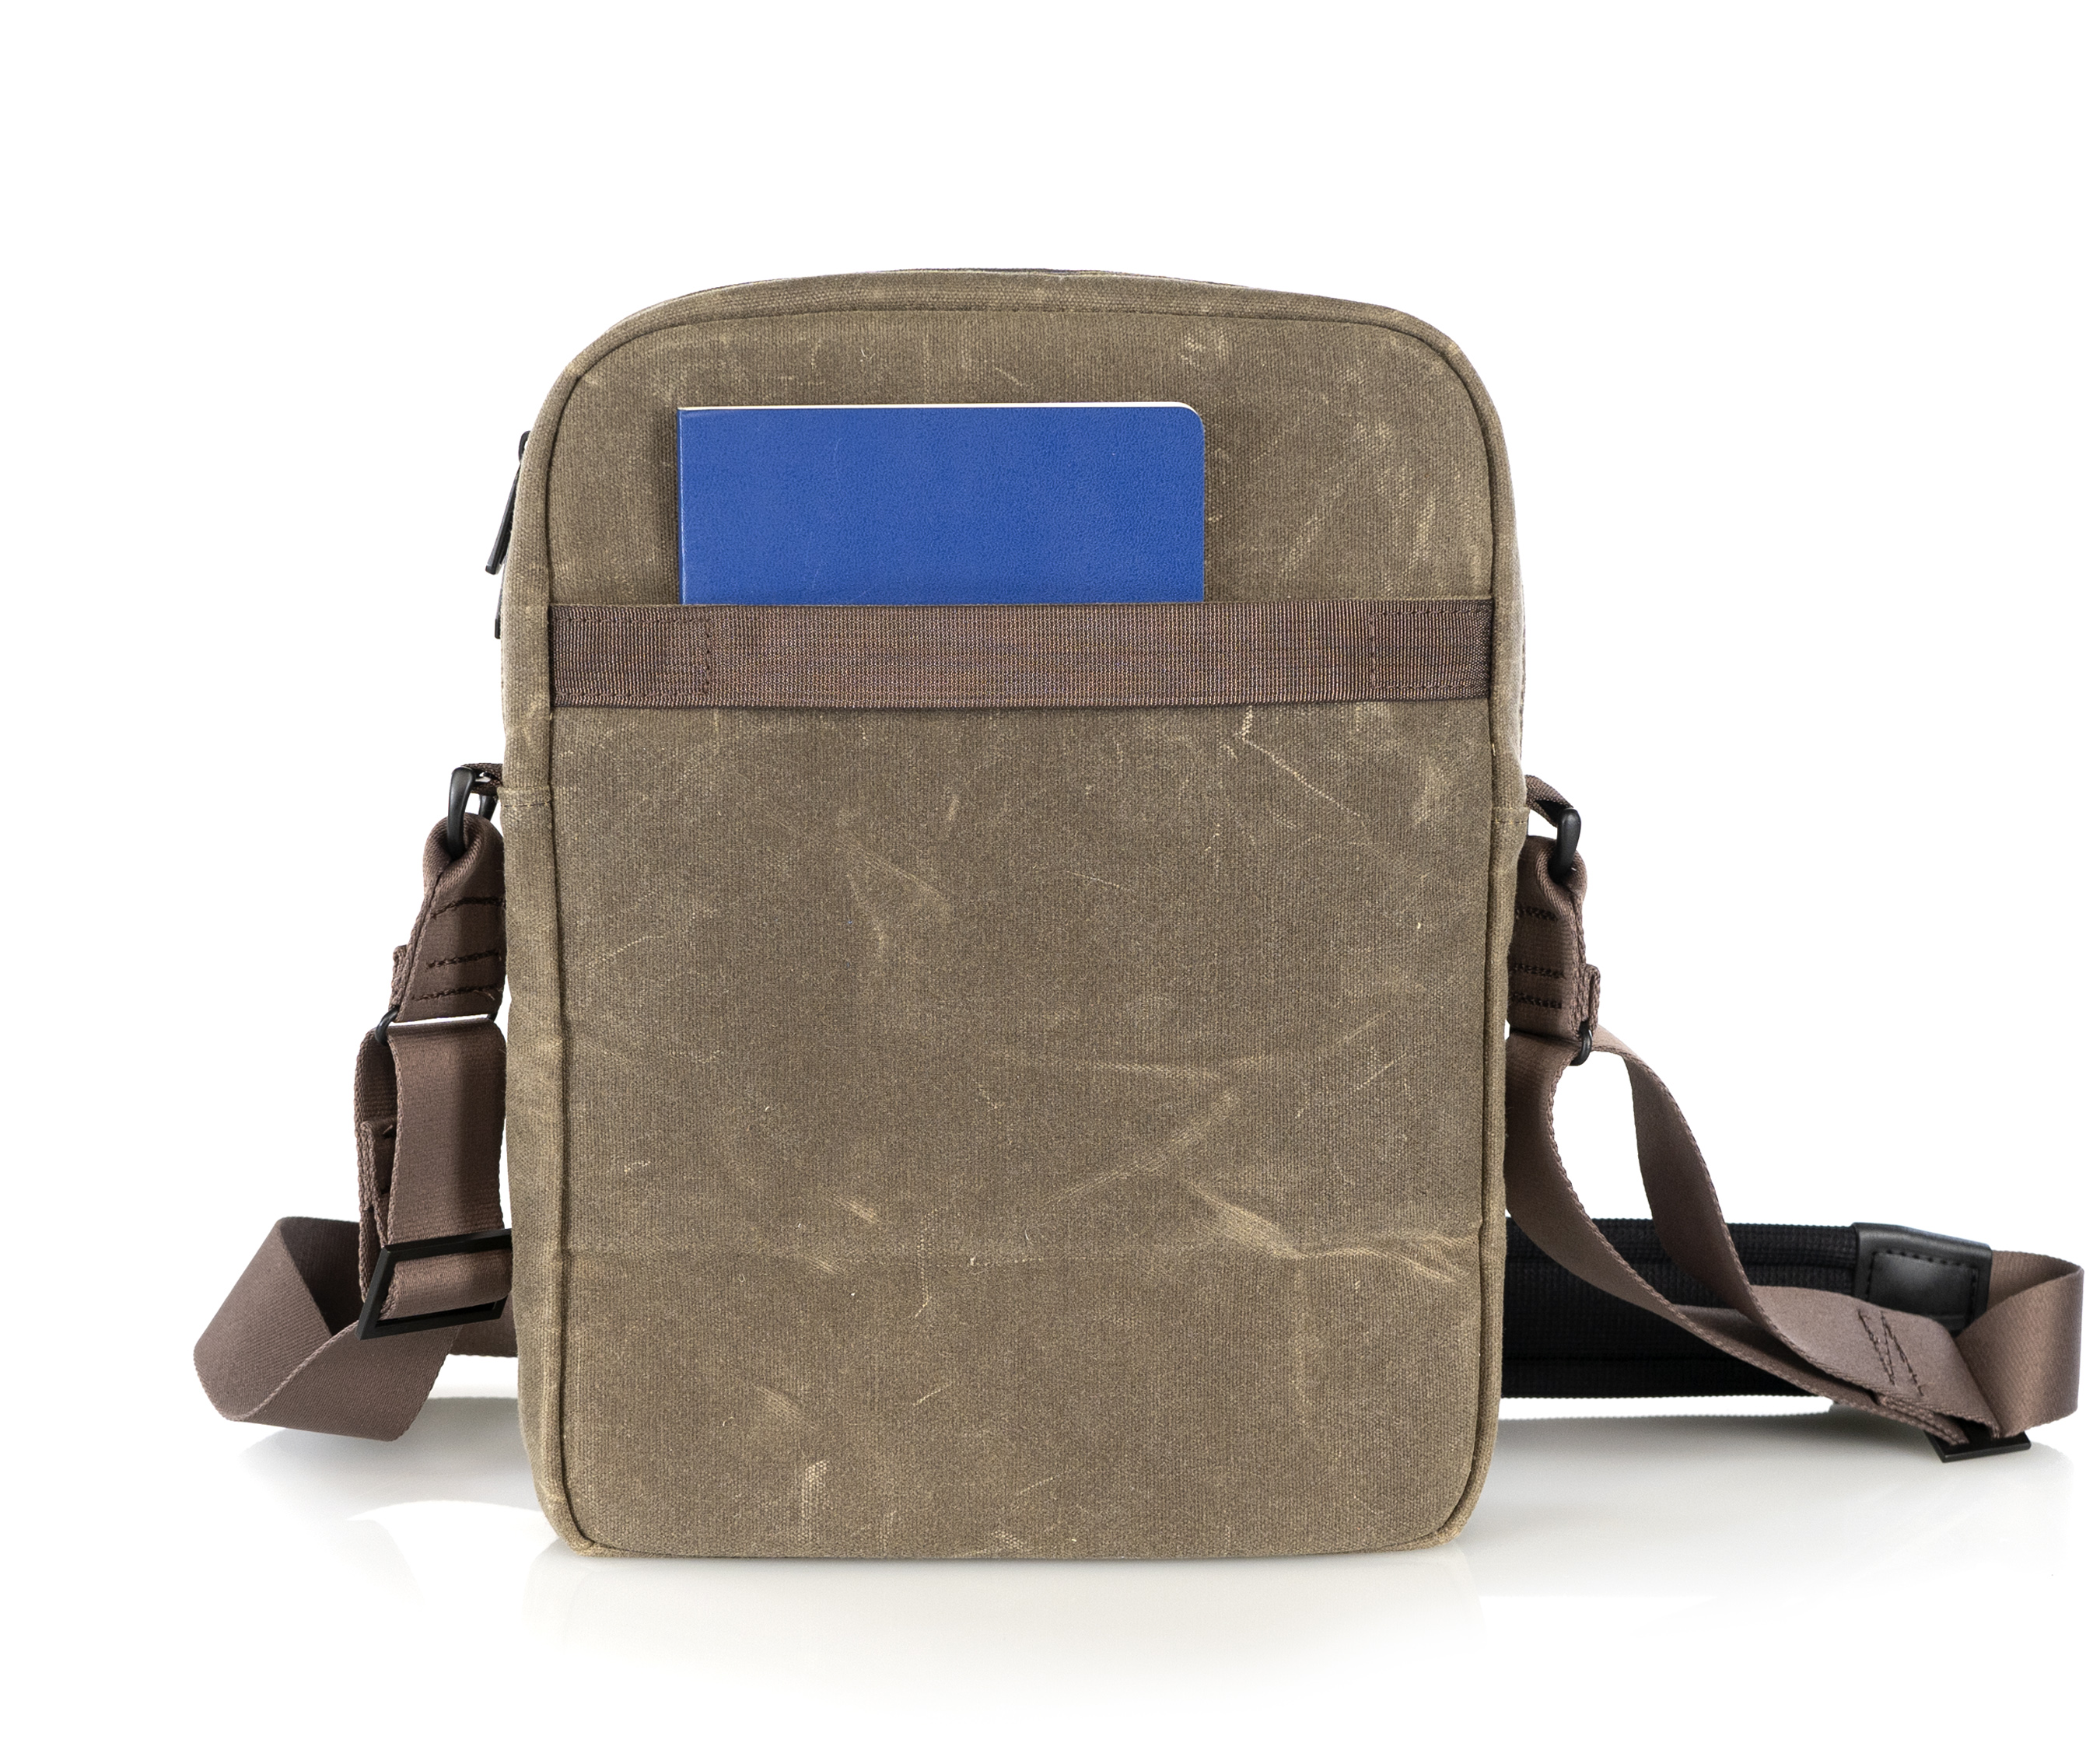 Crossbody rear view with open-topped pocket